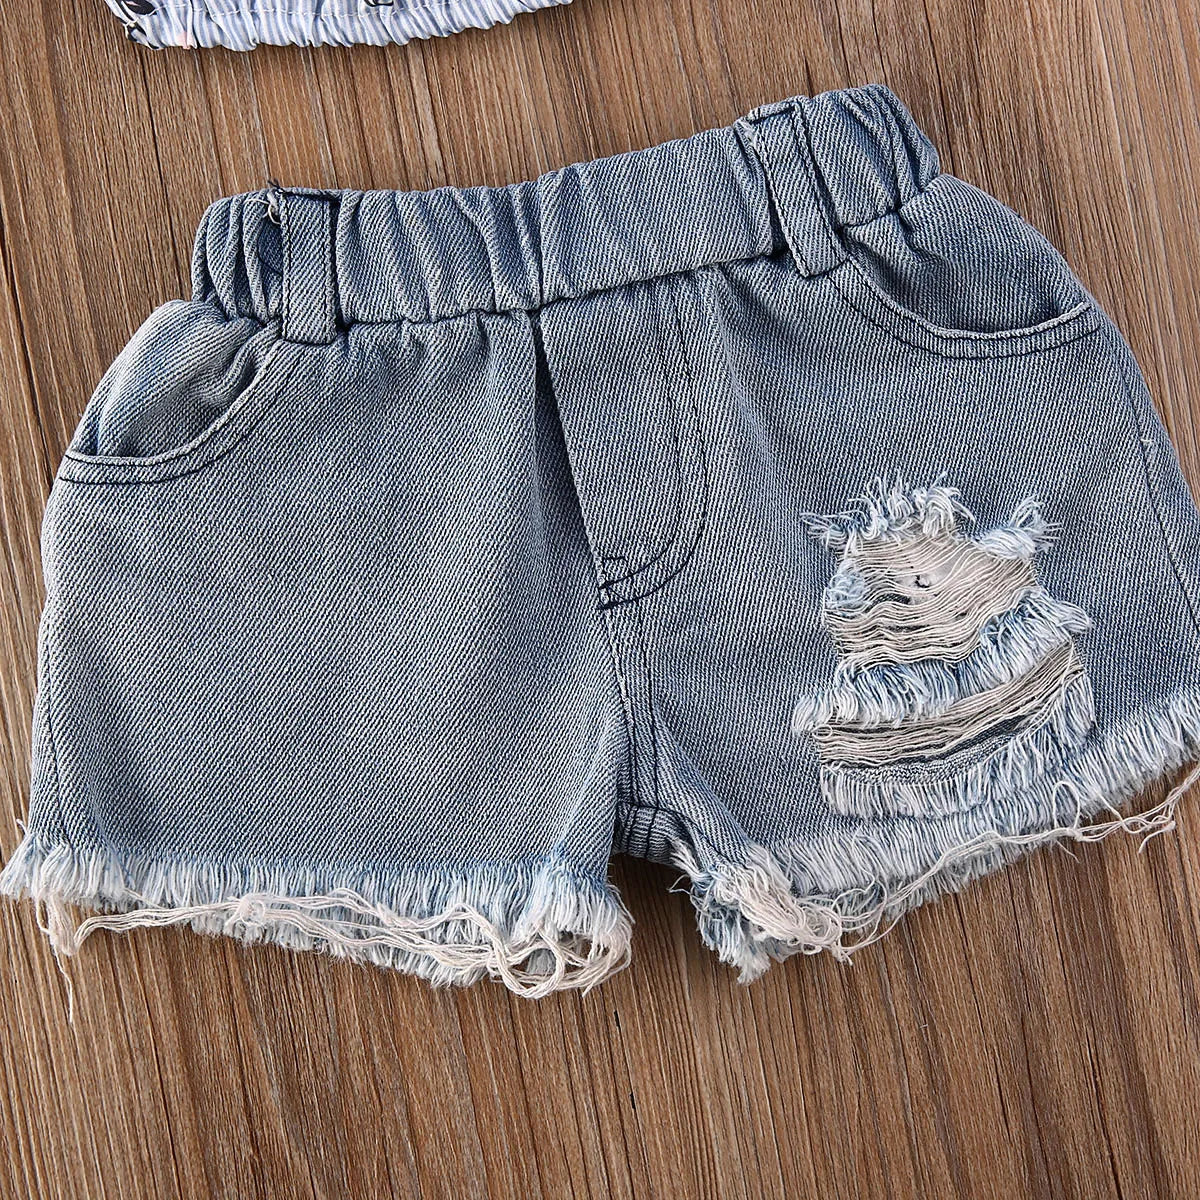 Fashion 2PCS Kid Baby Girl Clothes Off Shoulder Striped Ruffle Sleeve T-shirt Ripped Denim Shorts Summer Outfit Set